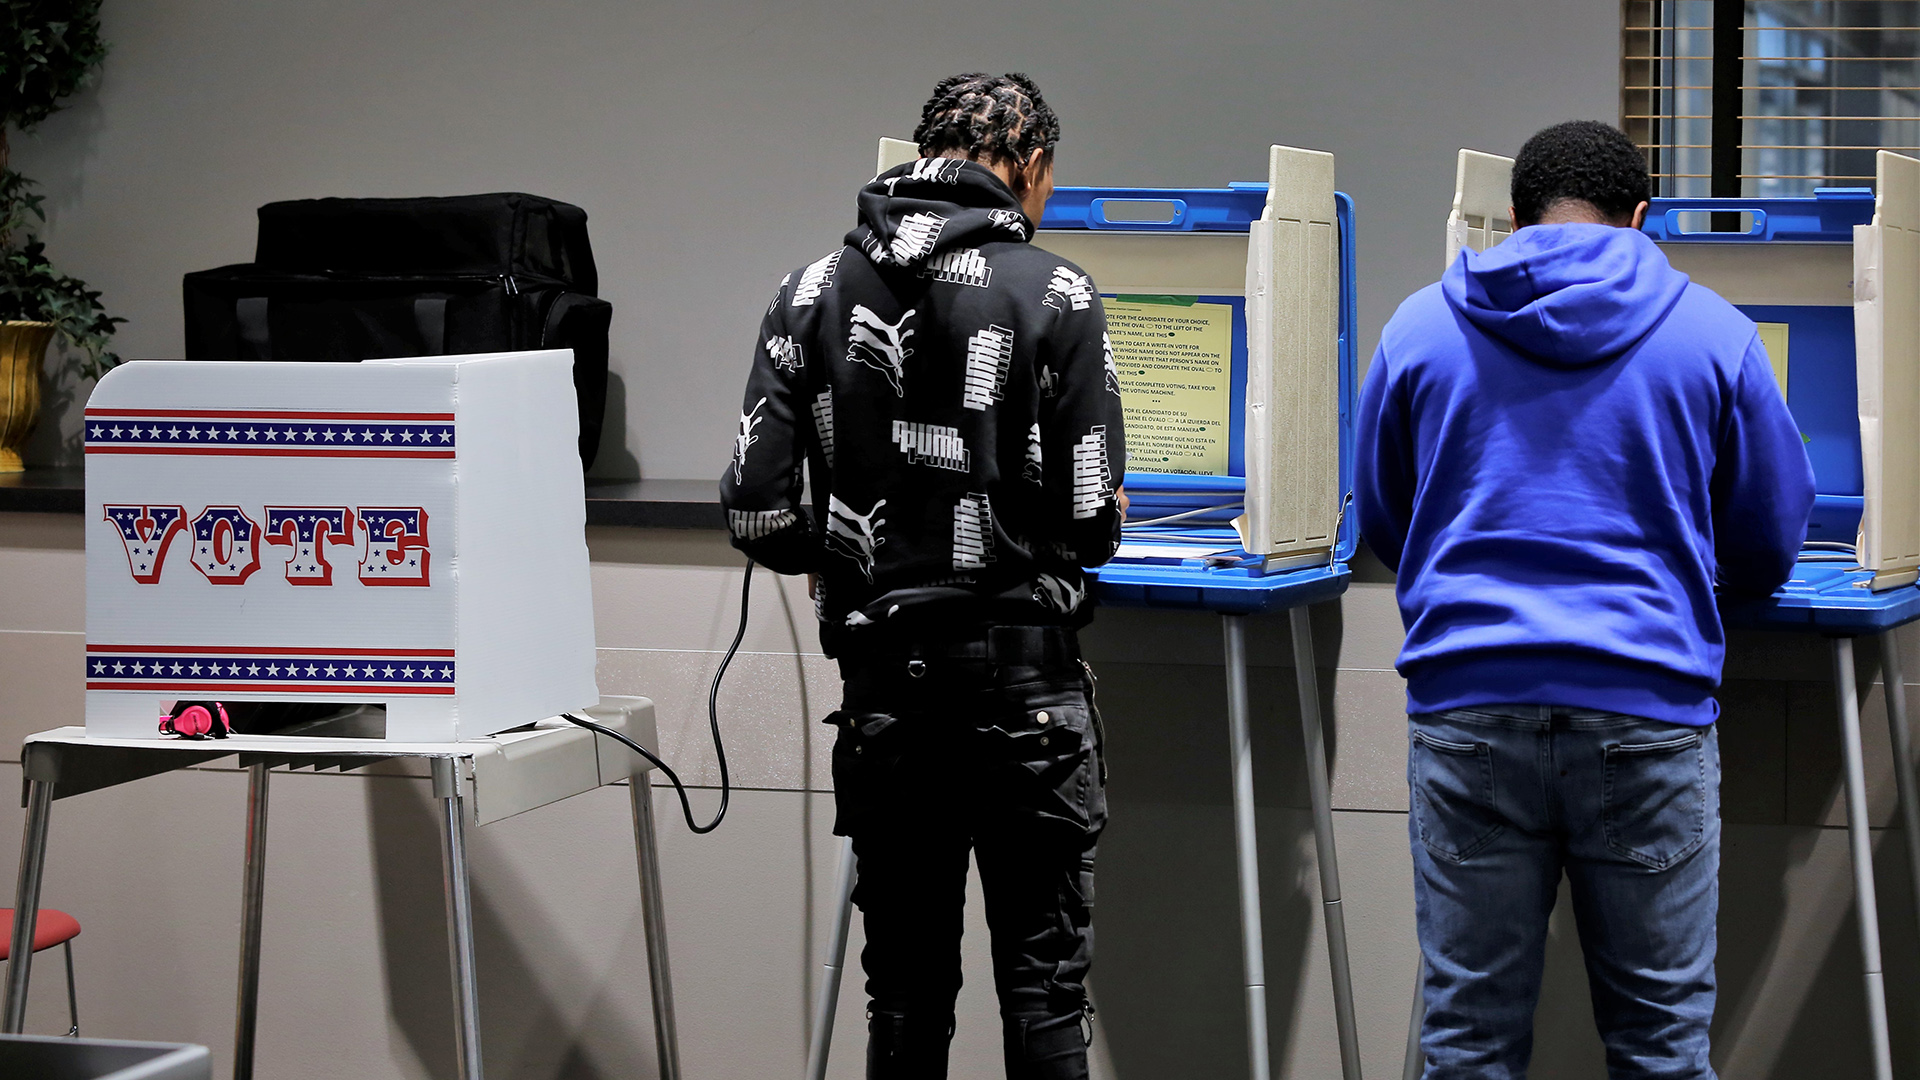 Christophe and Brandon LaSalle stand and face folding voting booths with metal legs and plastic privacy screen walls, in a room with potted plants and a window.